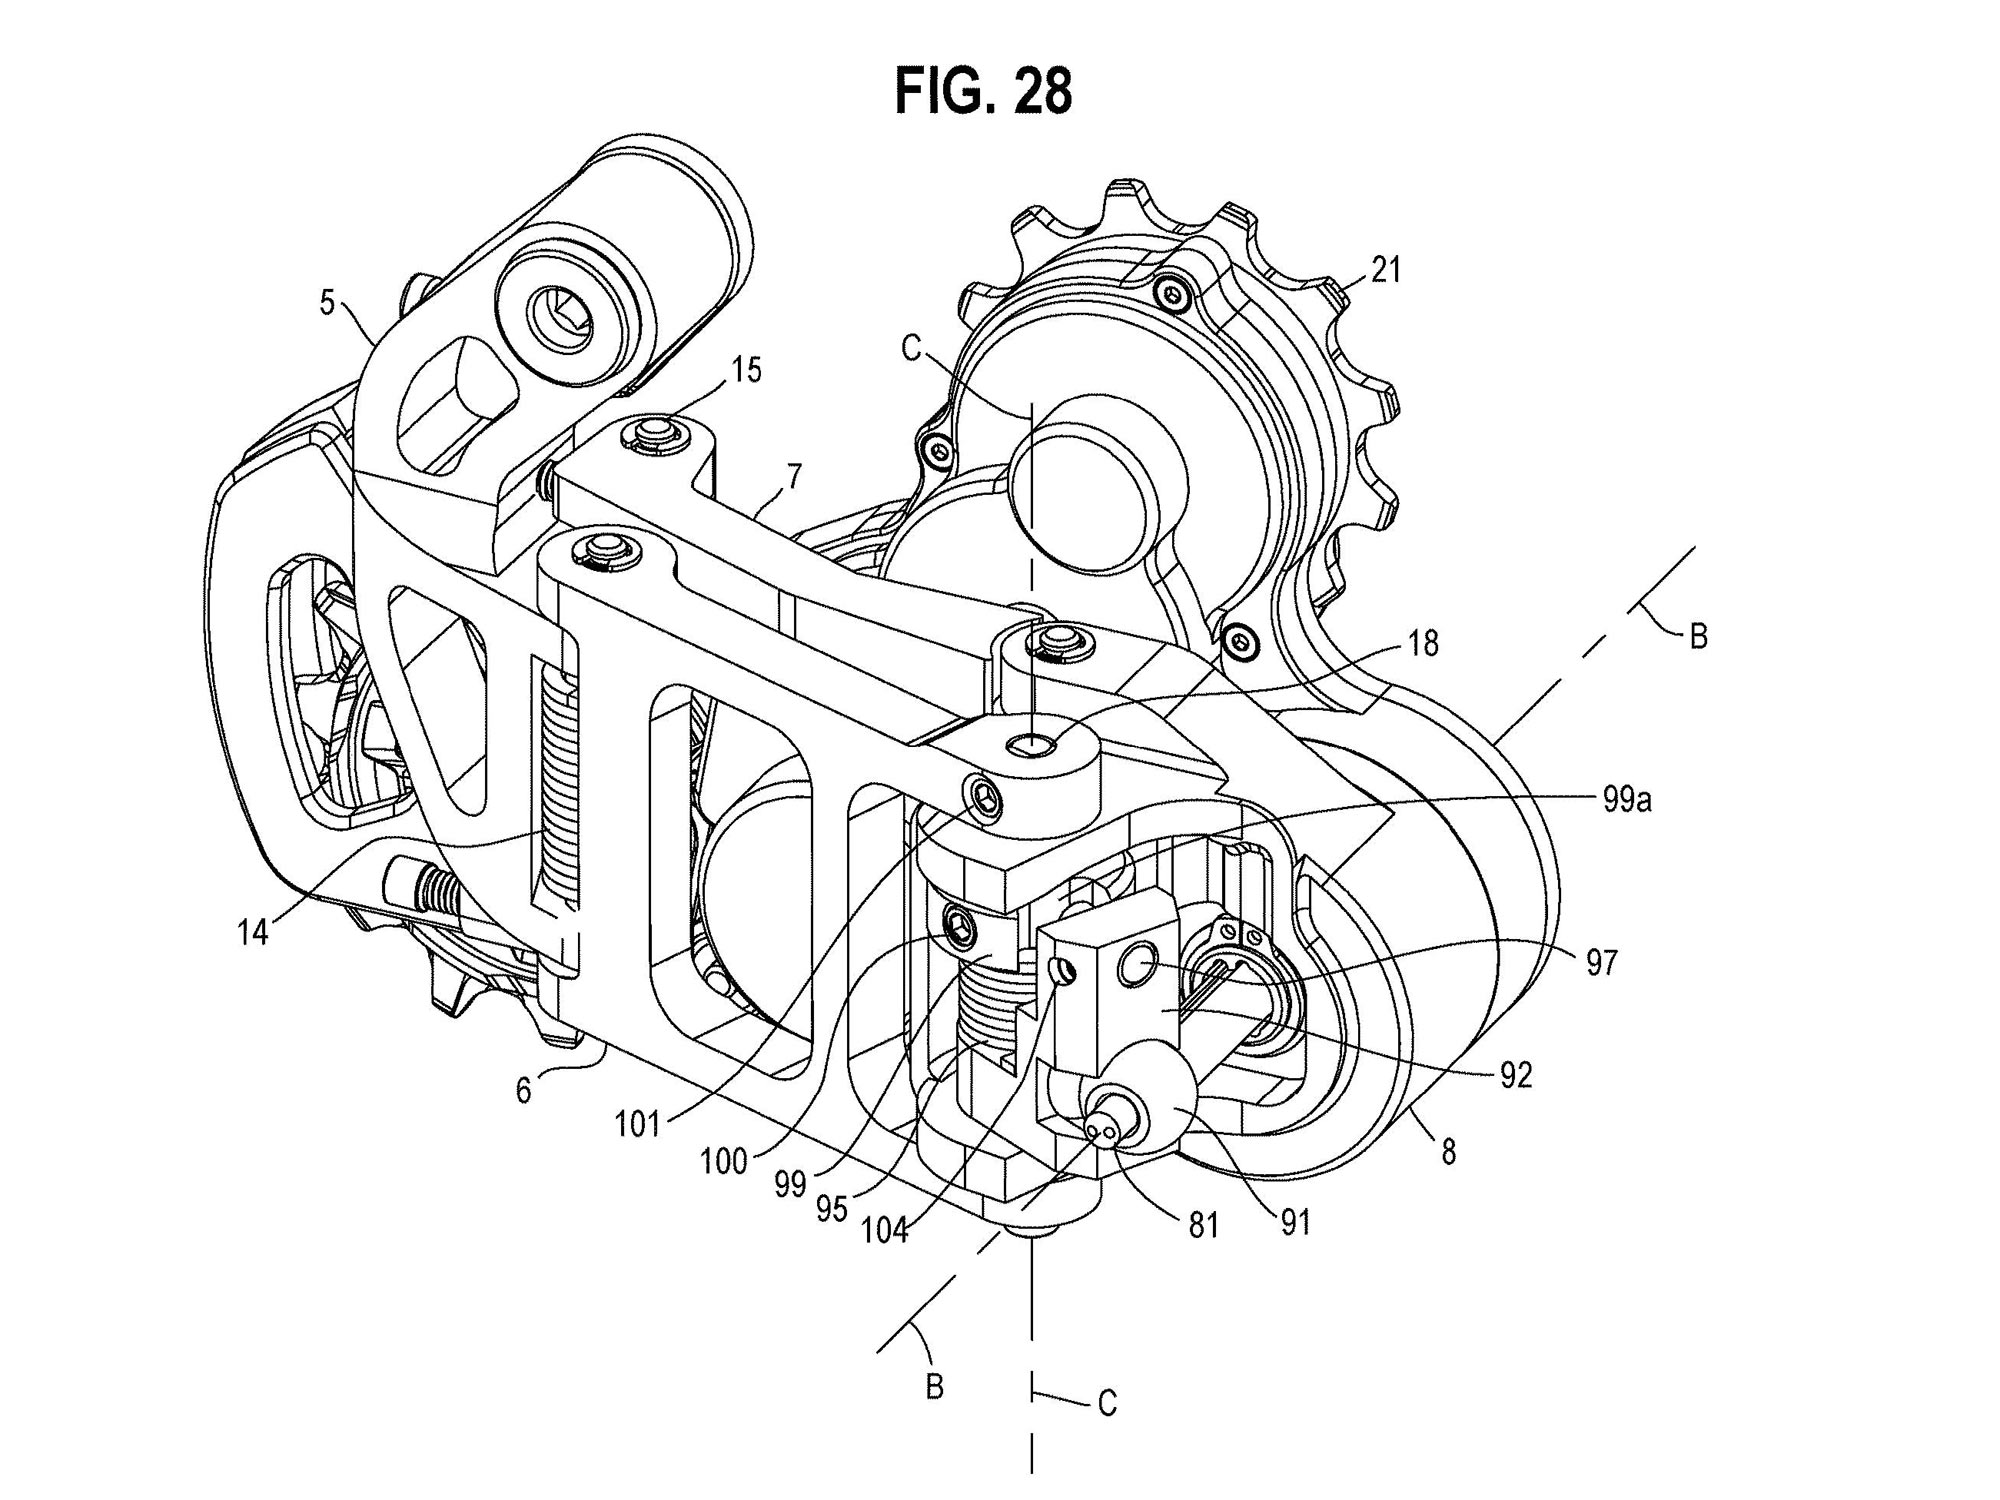 self-loading rear derailleur with sram auto-shifting patented energy harvesting system caged gearshift mechanism